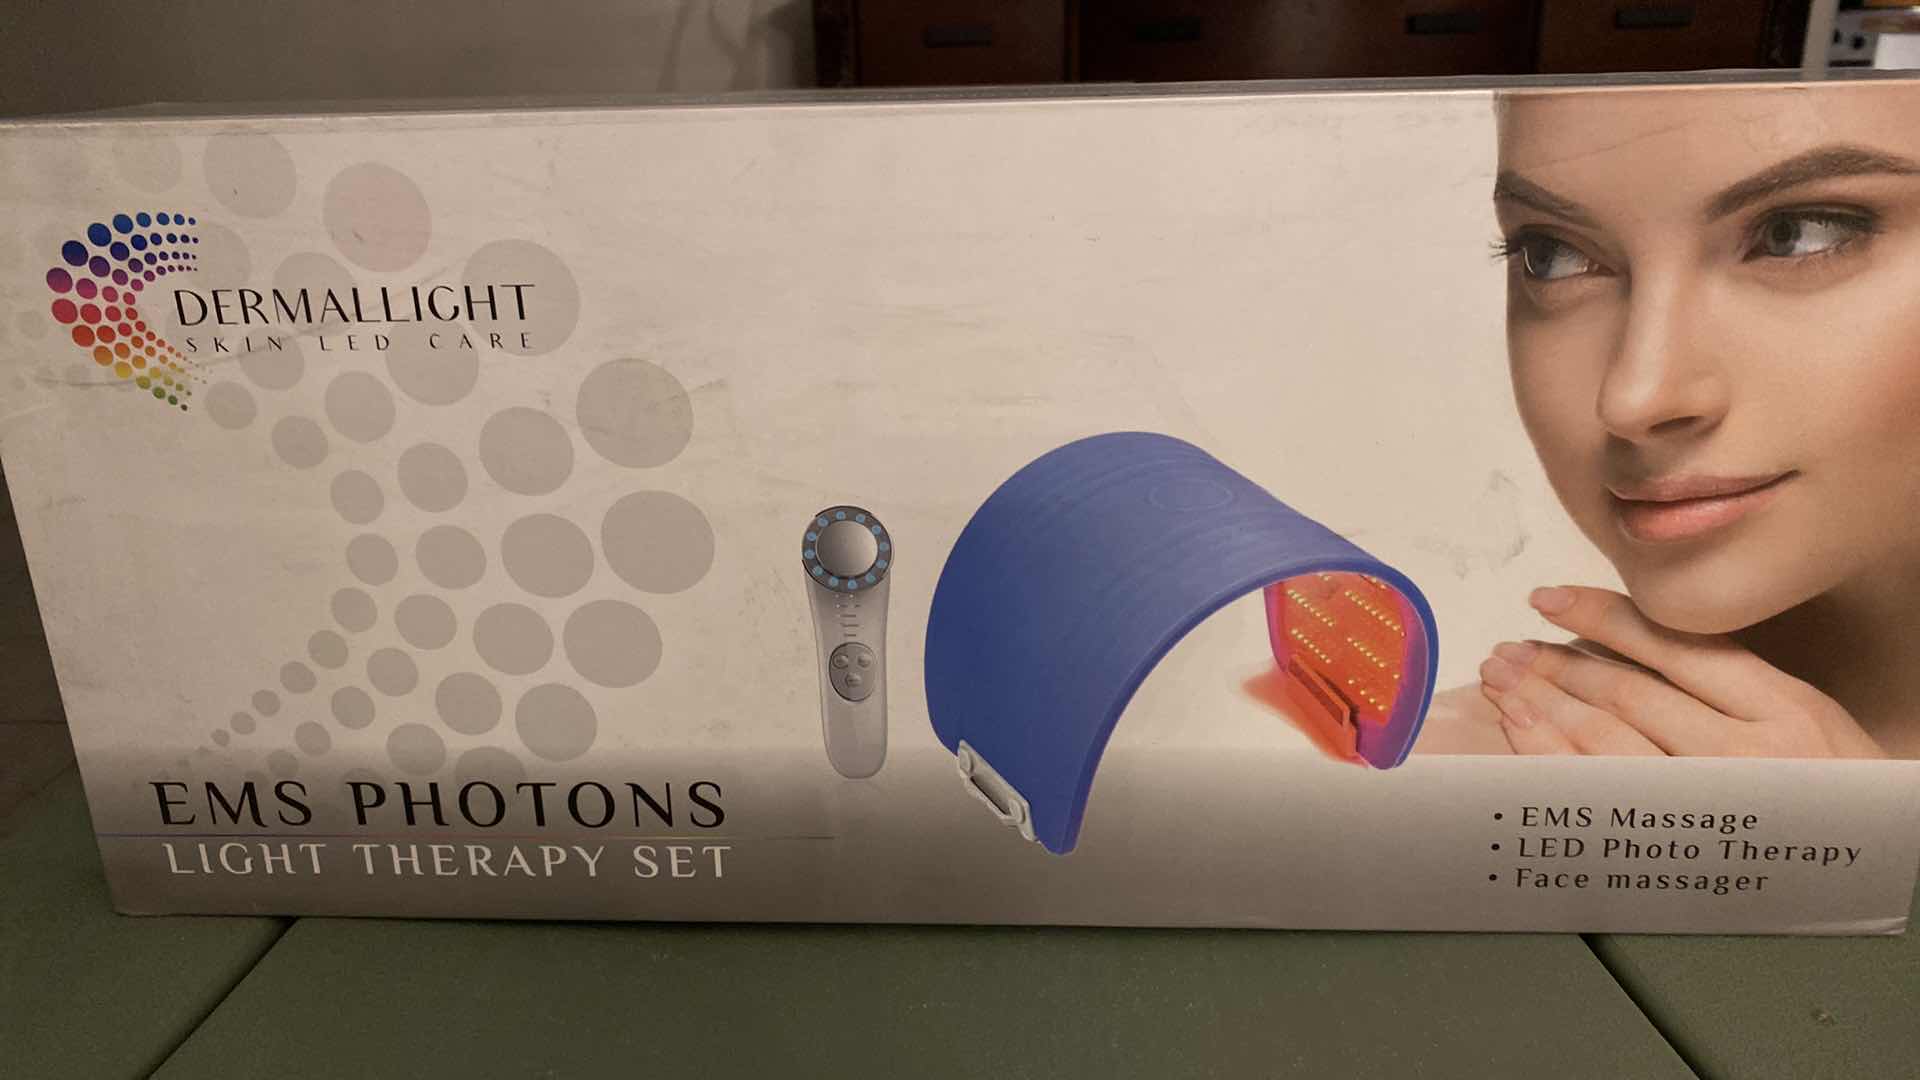 Photo 3 of NEW DERMALLIGHT SKIN LED CARE EMS PHOTONS LIGHT THERAPY SET FOR BODY AND FACE